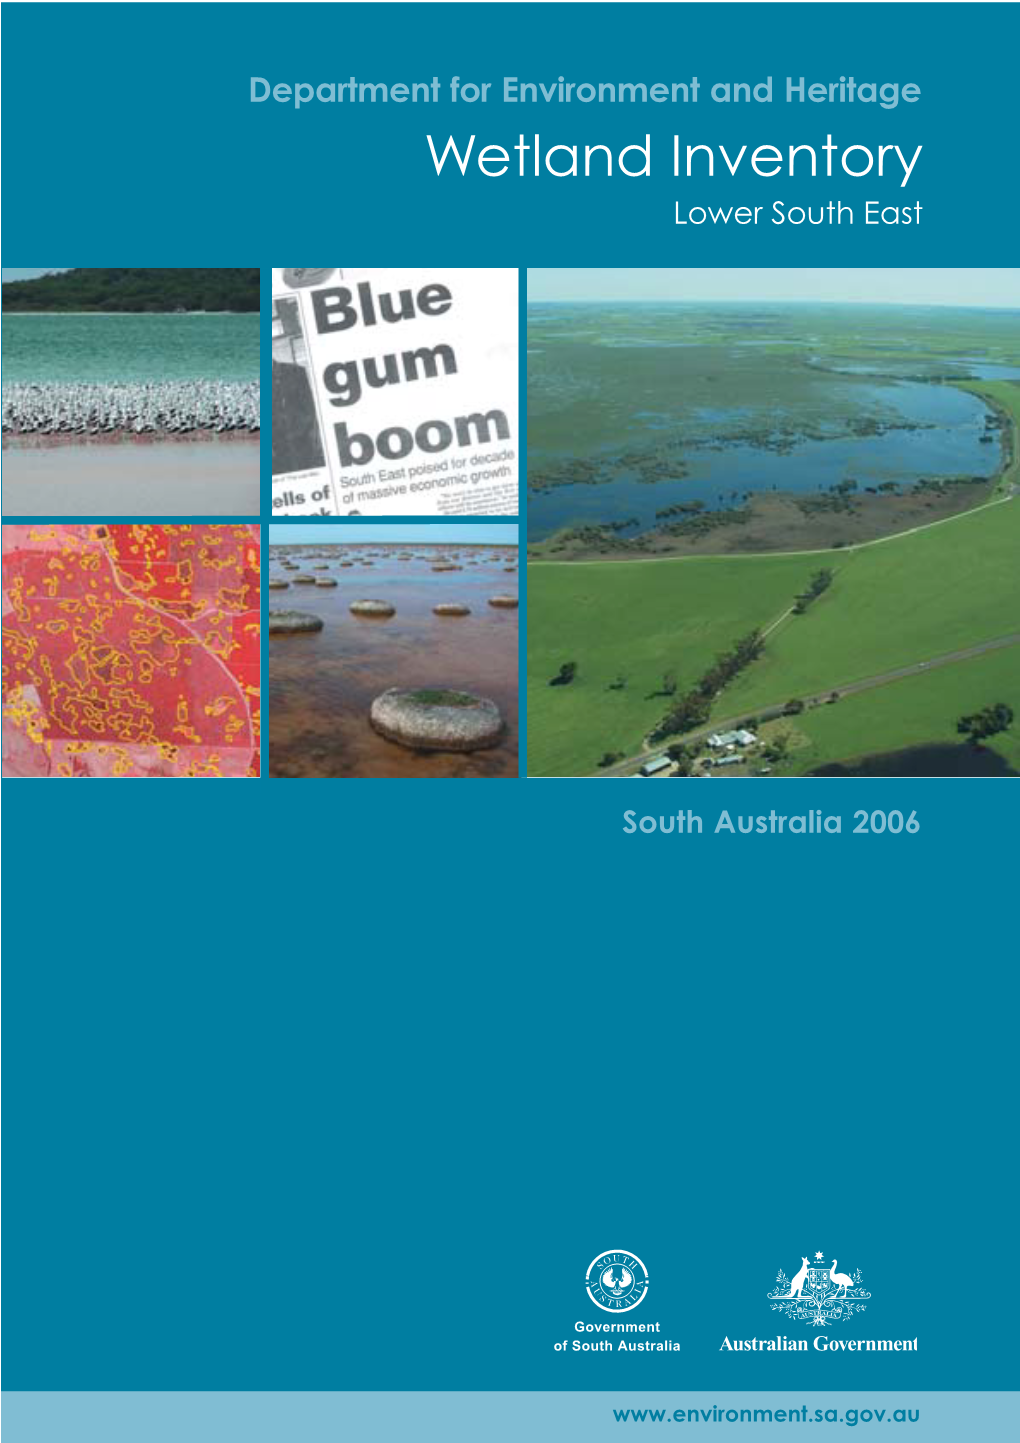 Wetland Inventory for the Lower South East, South Australia